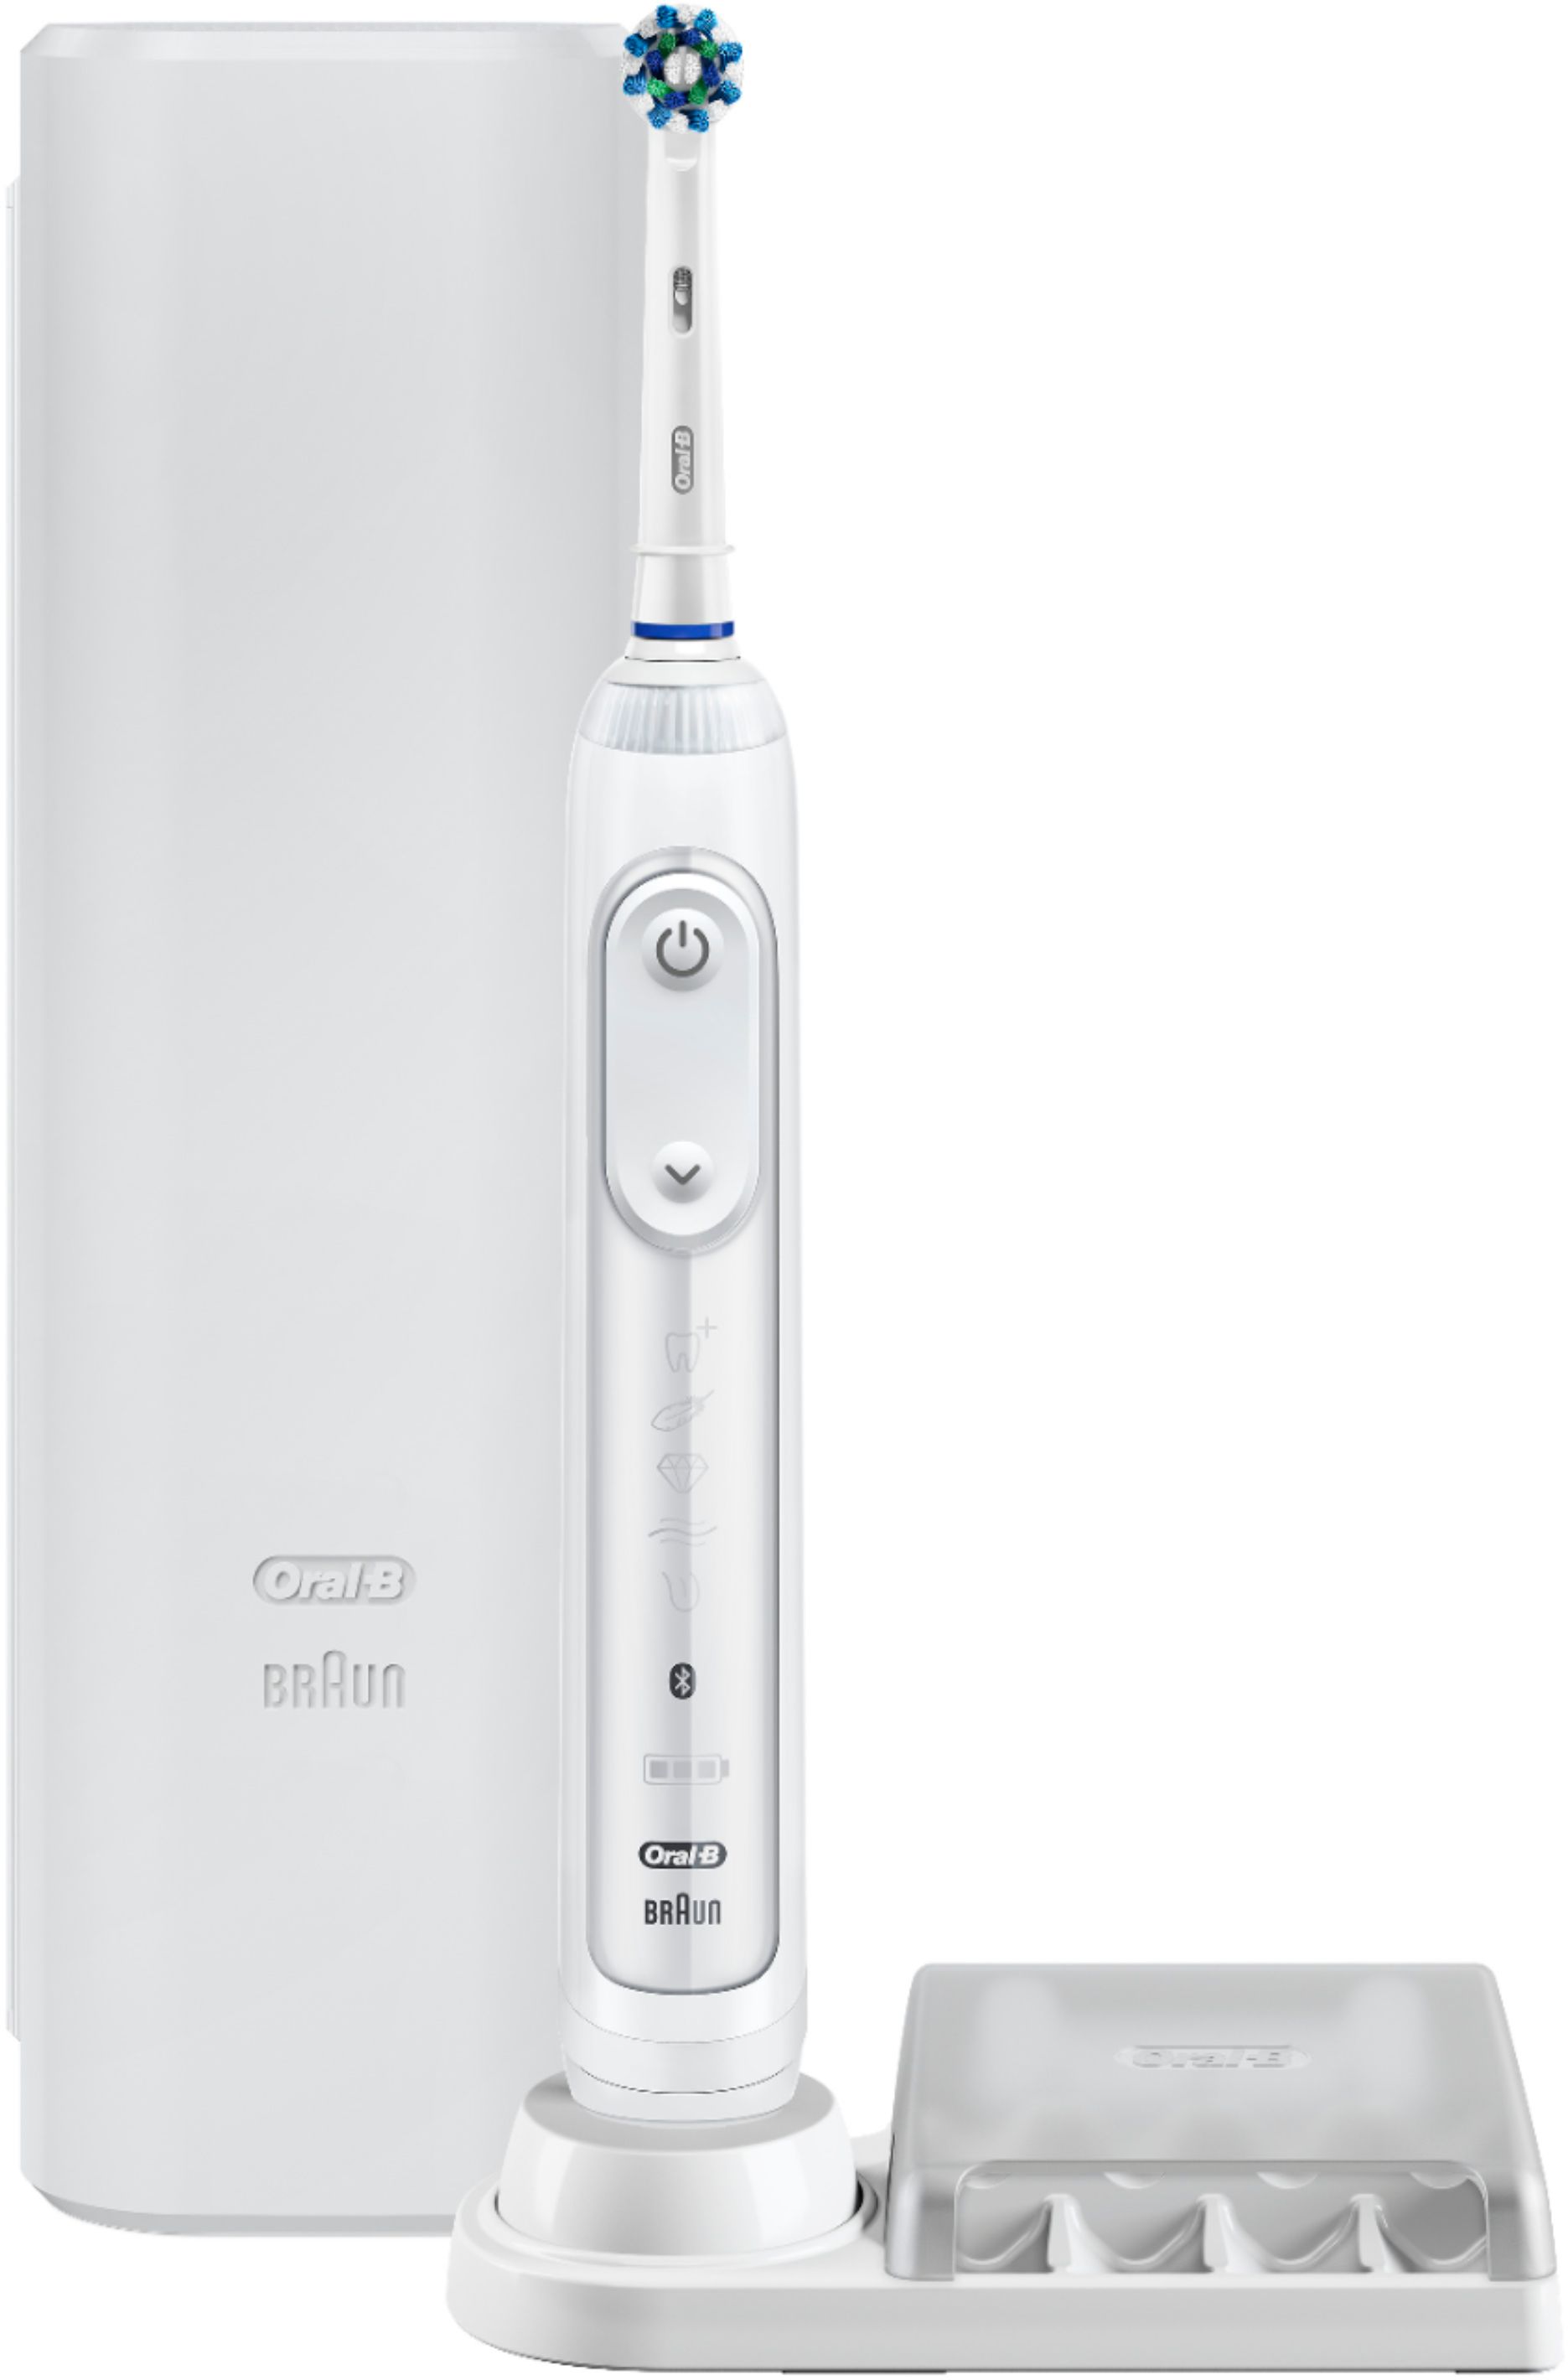 Oral B Smartseries Pro 6000 Connected Electric Toothbrush White